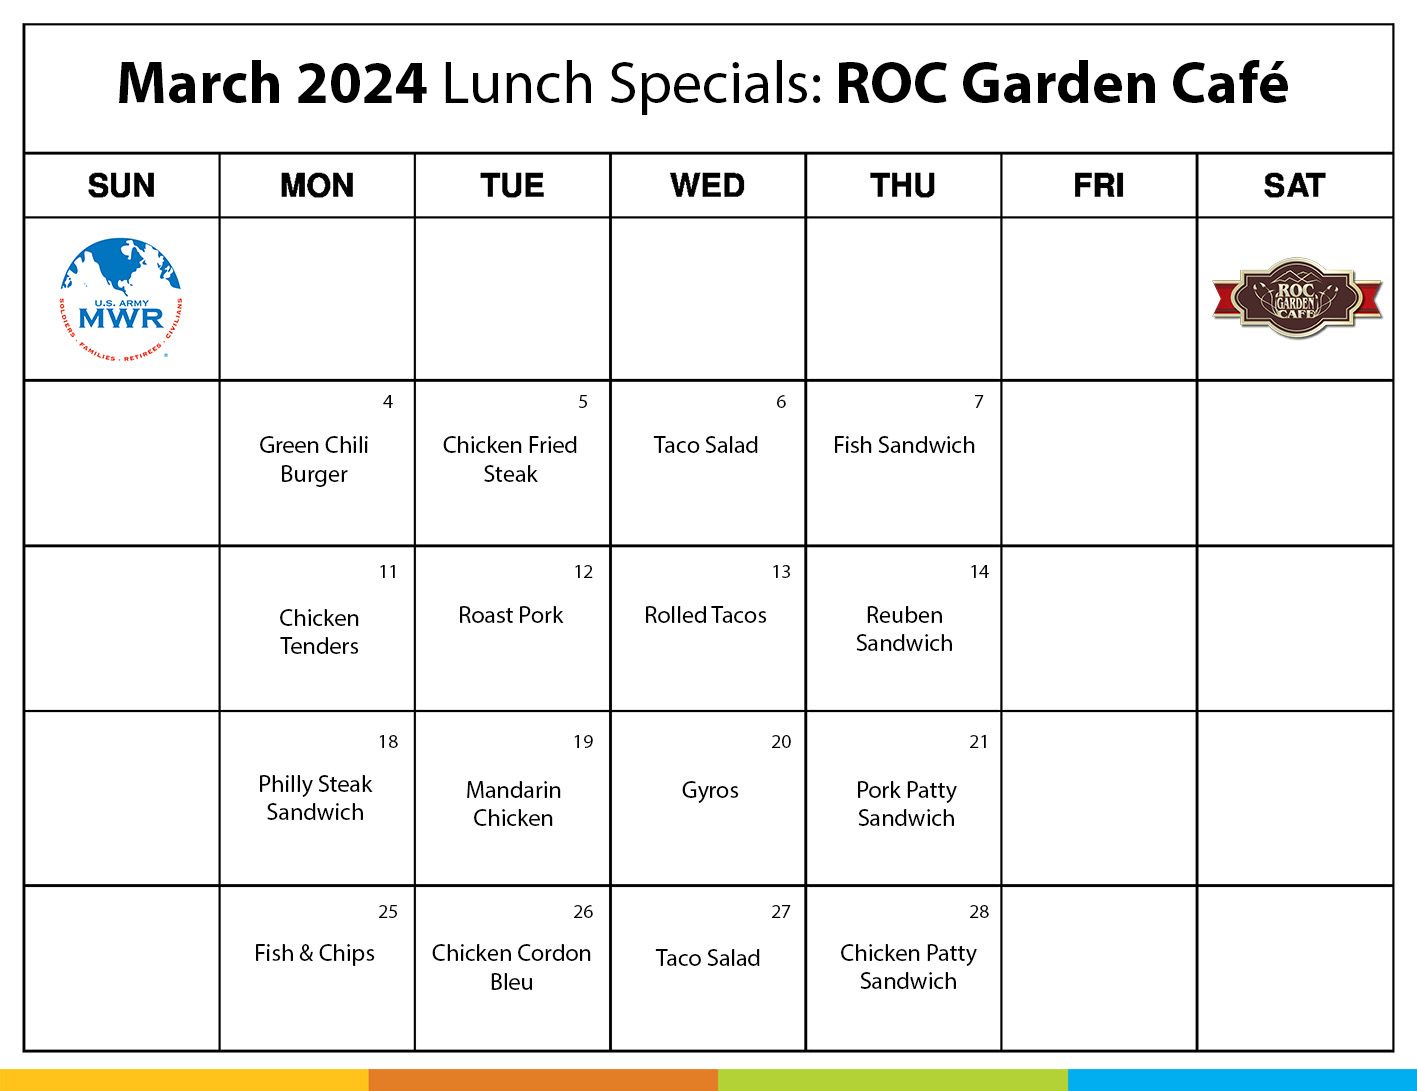 YPG_The ROC_March Lunch Special_2024.jpg